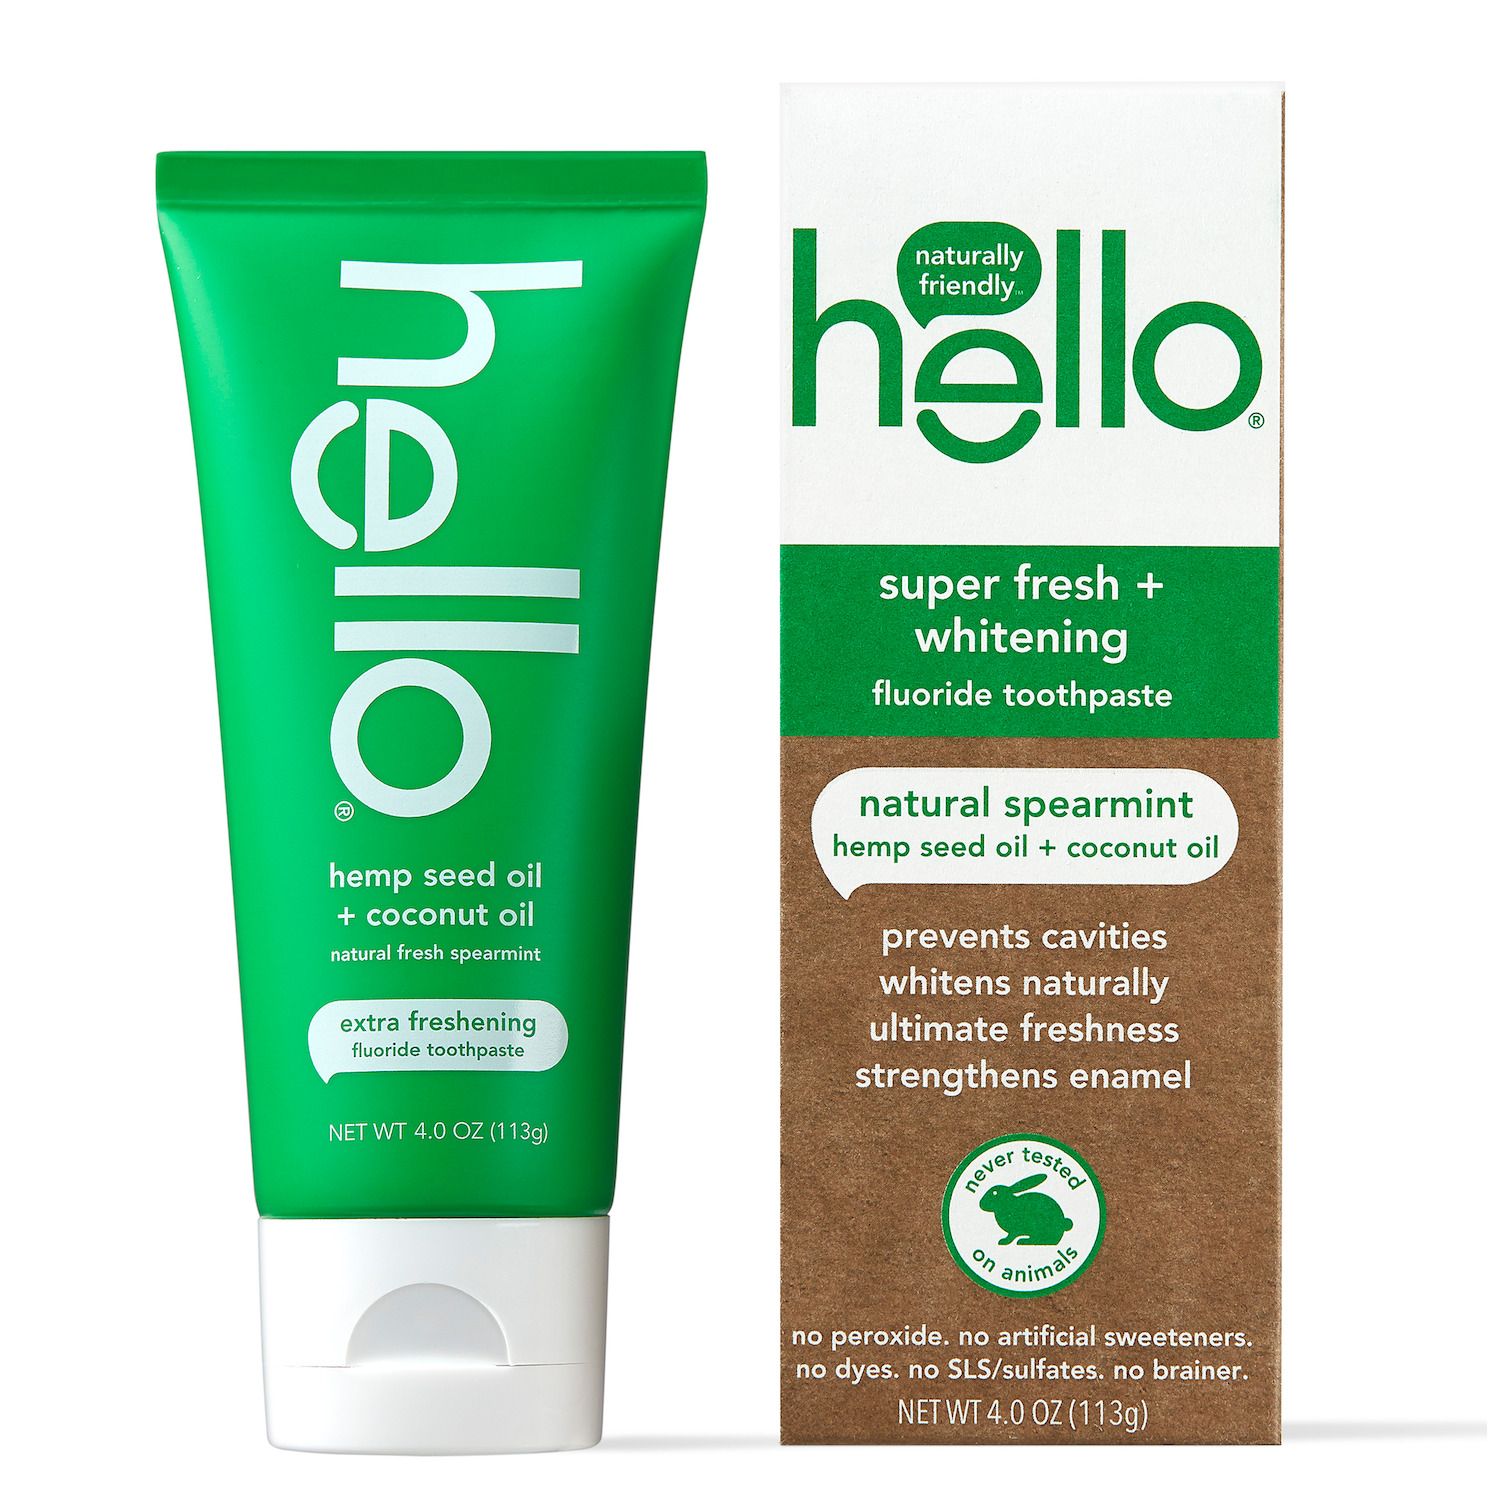 Image for hello Super Fresh + Whitening Fluoride Toothpaste at Kohl's.